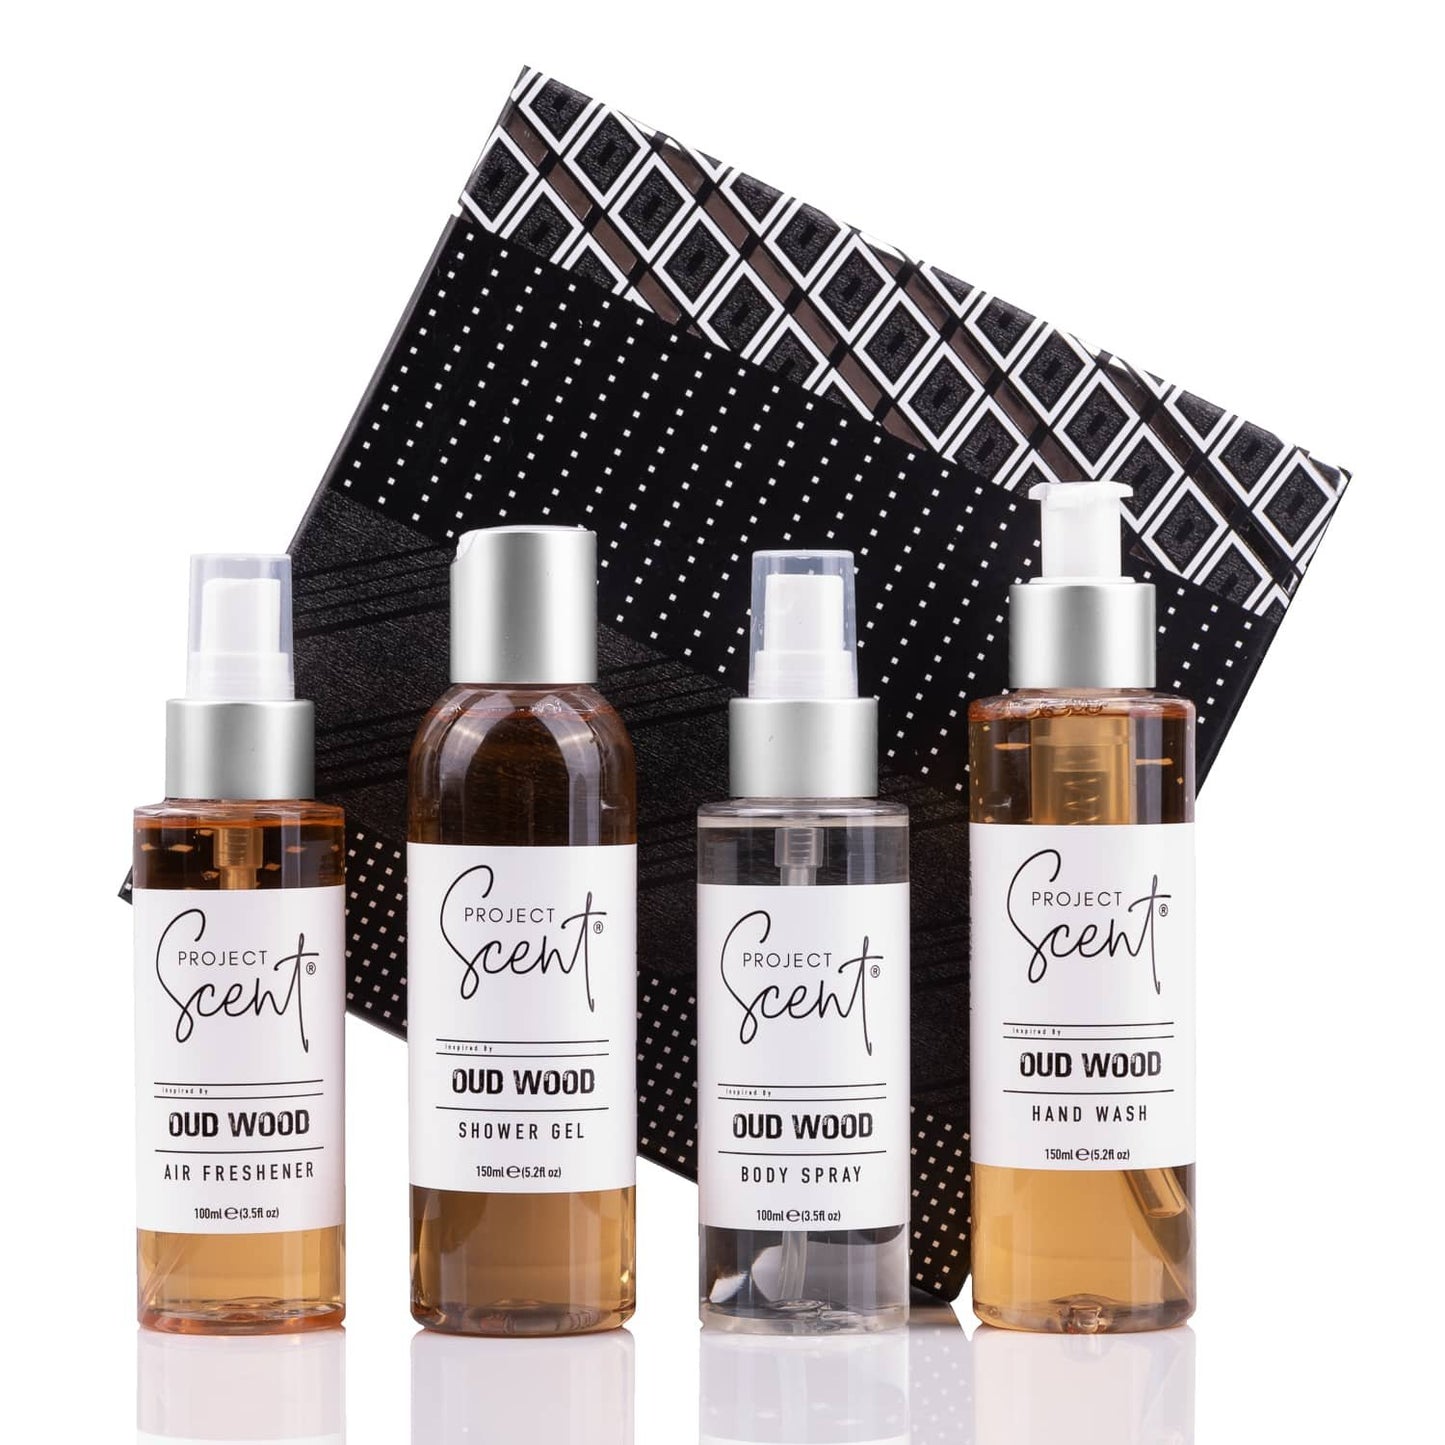 Project Scent Men's Mixed Gift Box